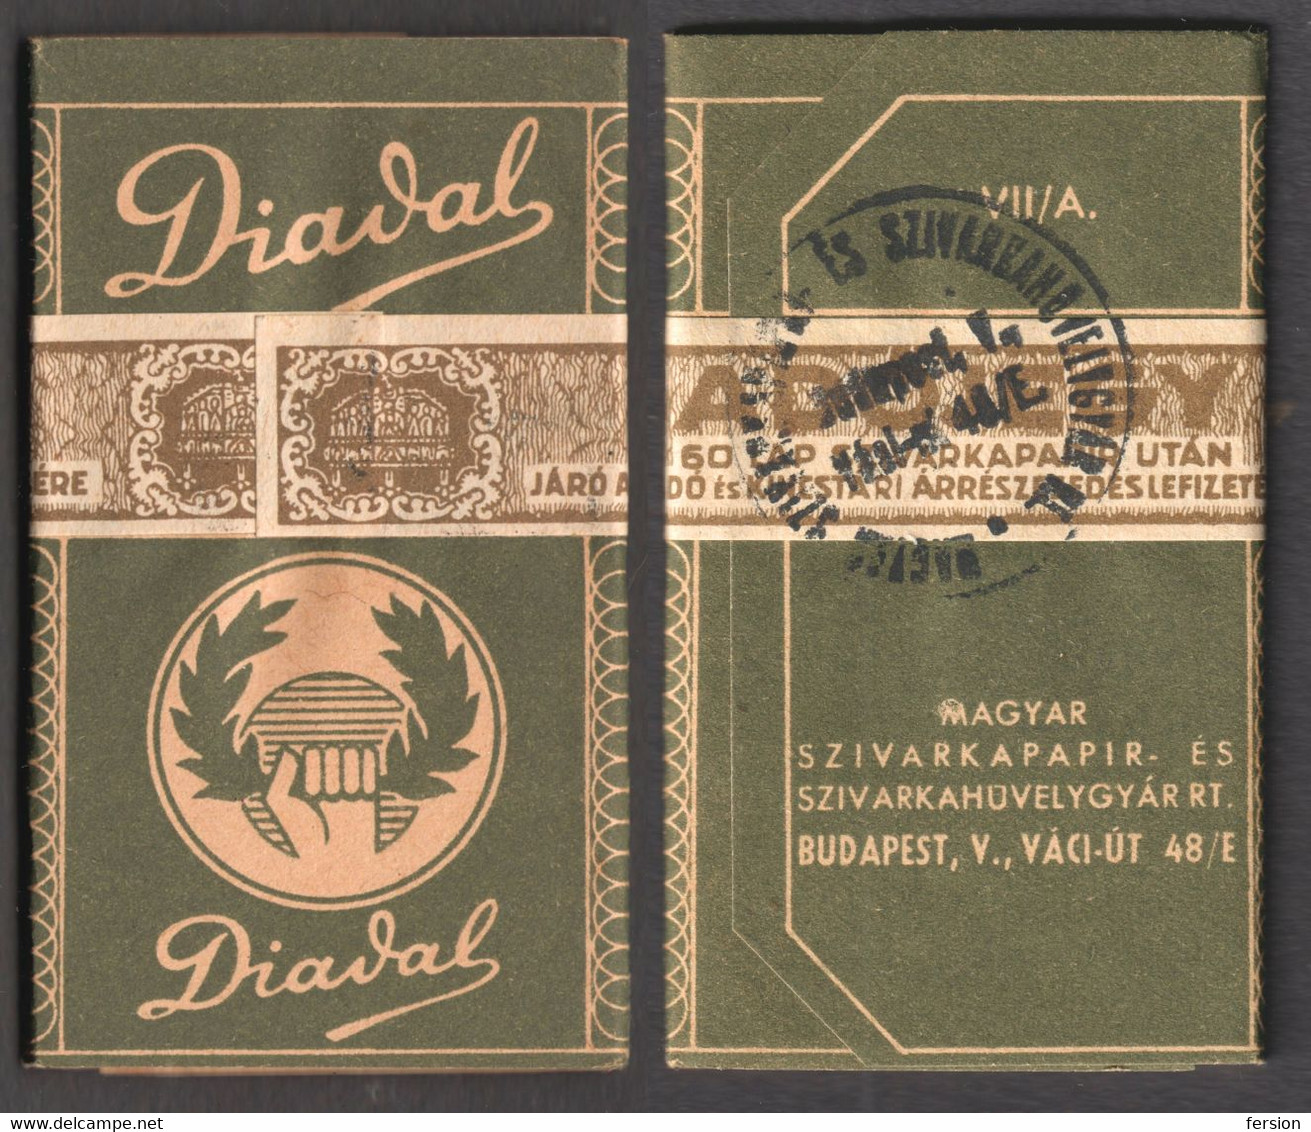 REVENUE Seal Fiscal Tax Stripe Hungary CIGARETTE TOBACCO Paper Package LABEL Cover DIADAL VICTORY 1930 UNUSED Full Paper - Steuermarken